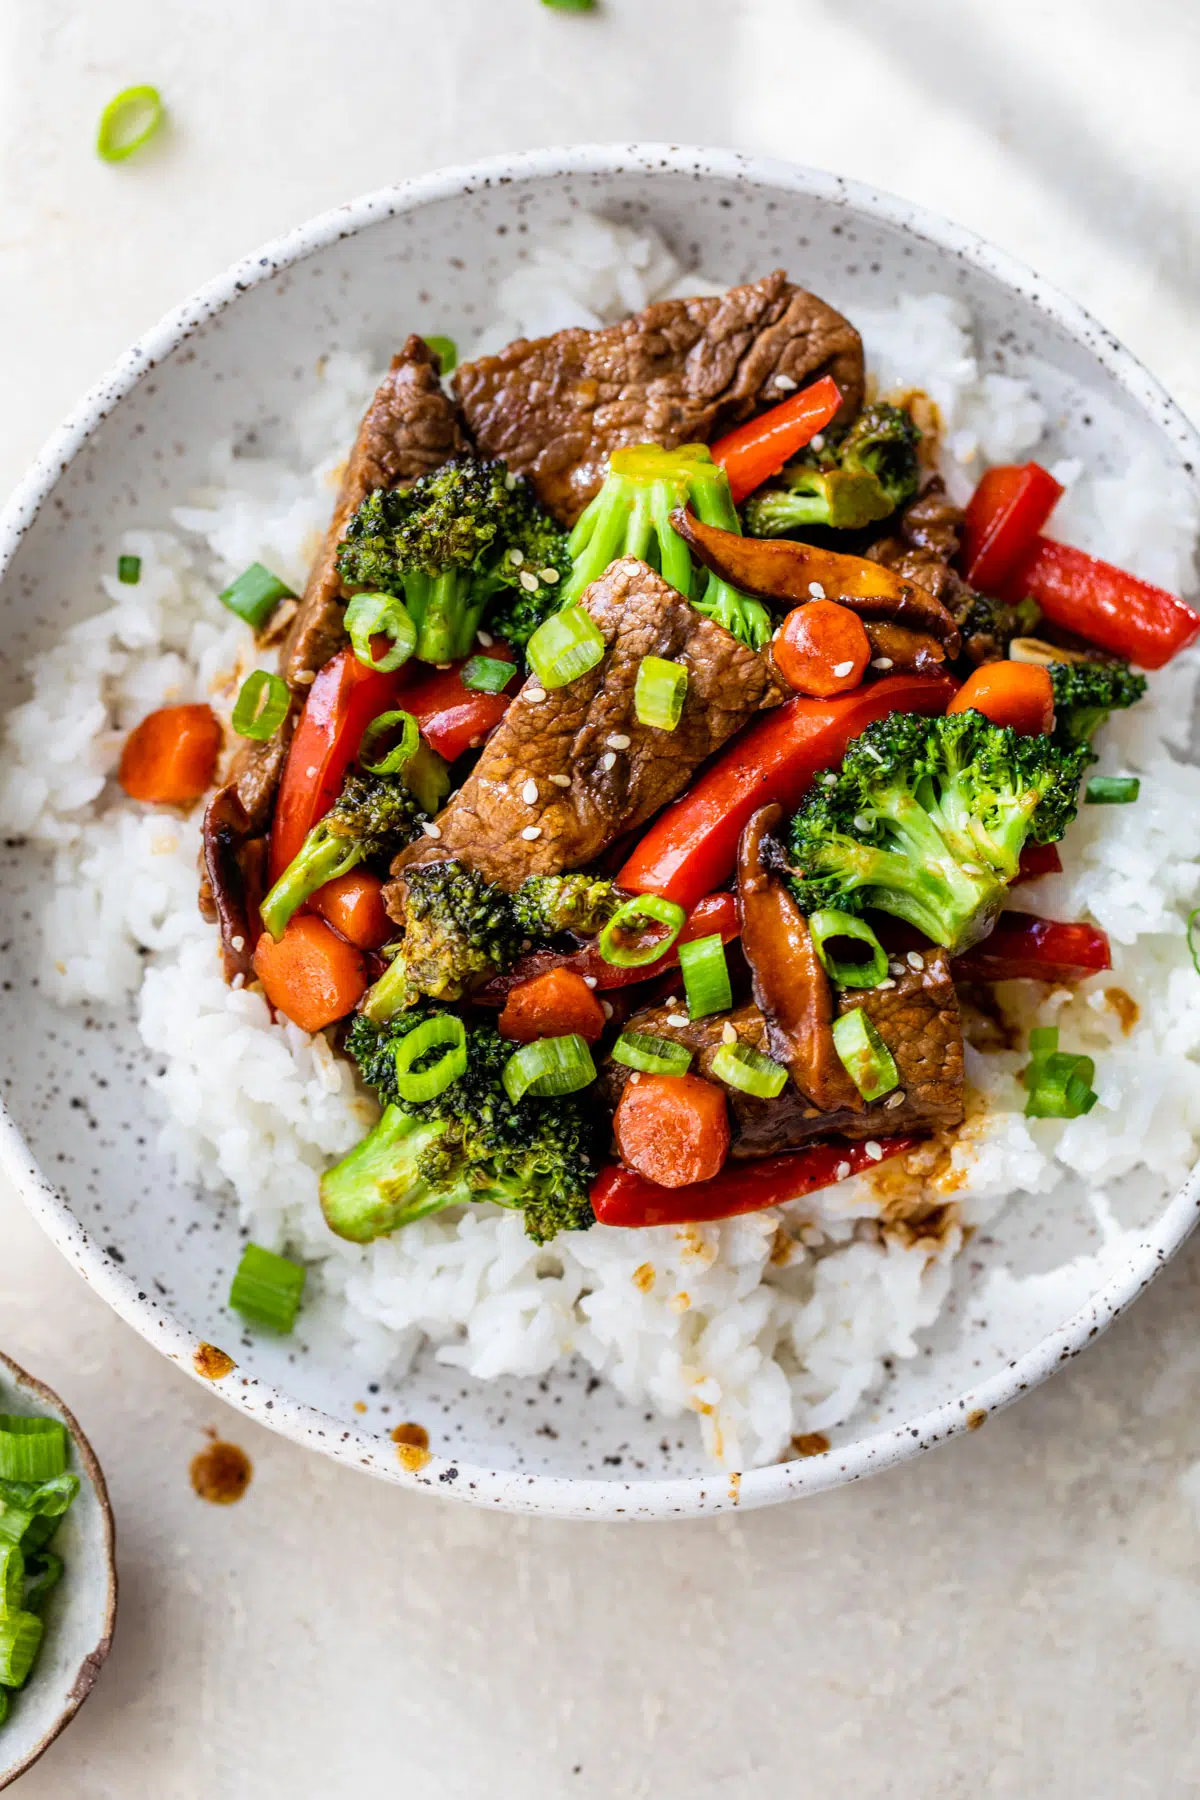 a bowl of rice topped with beef and vegetables like broccoli and carrots